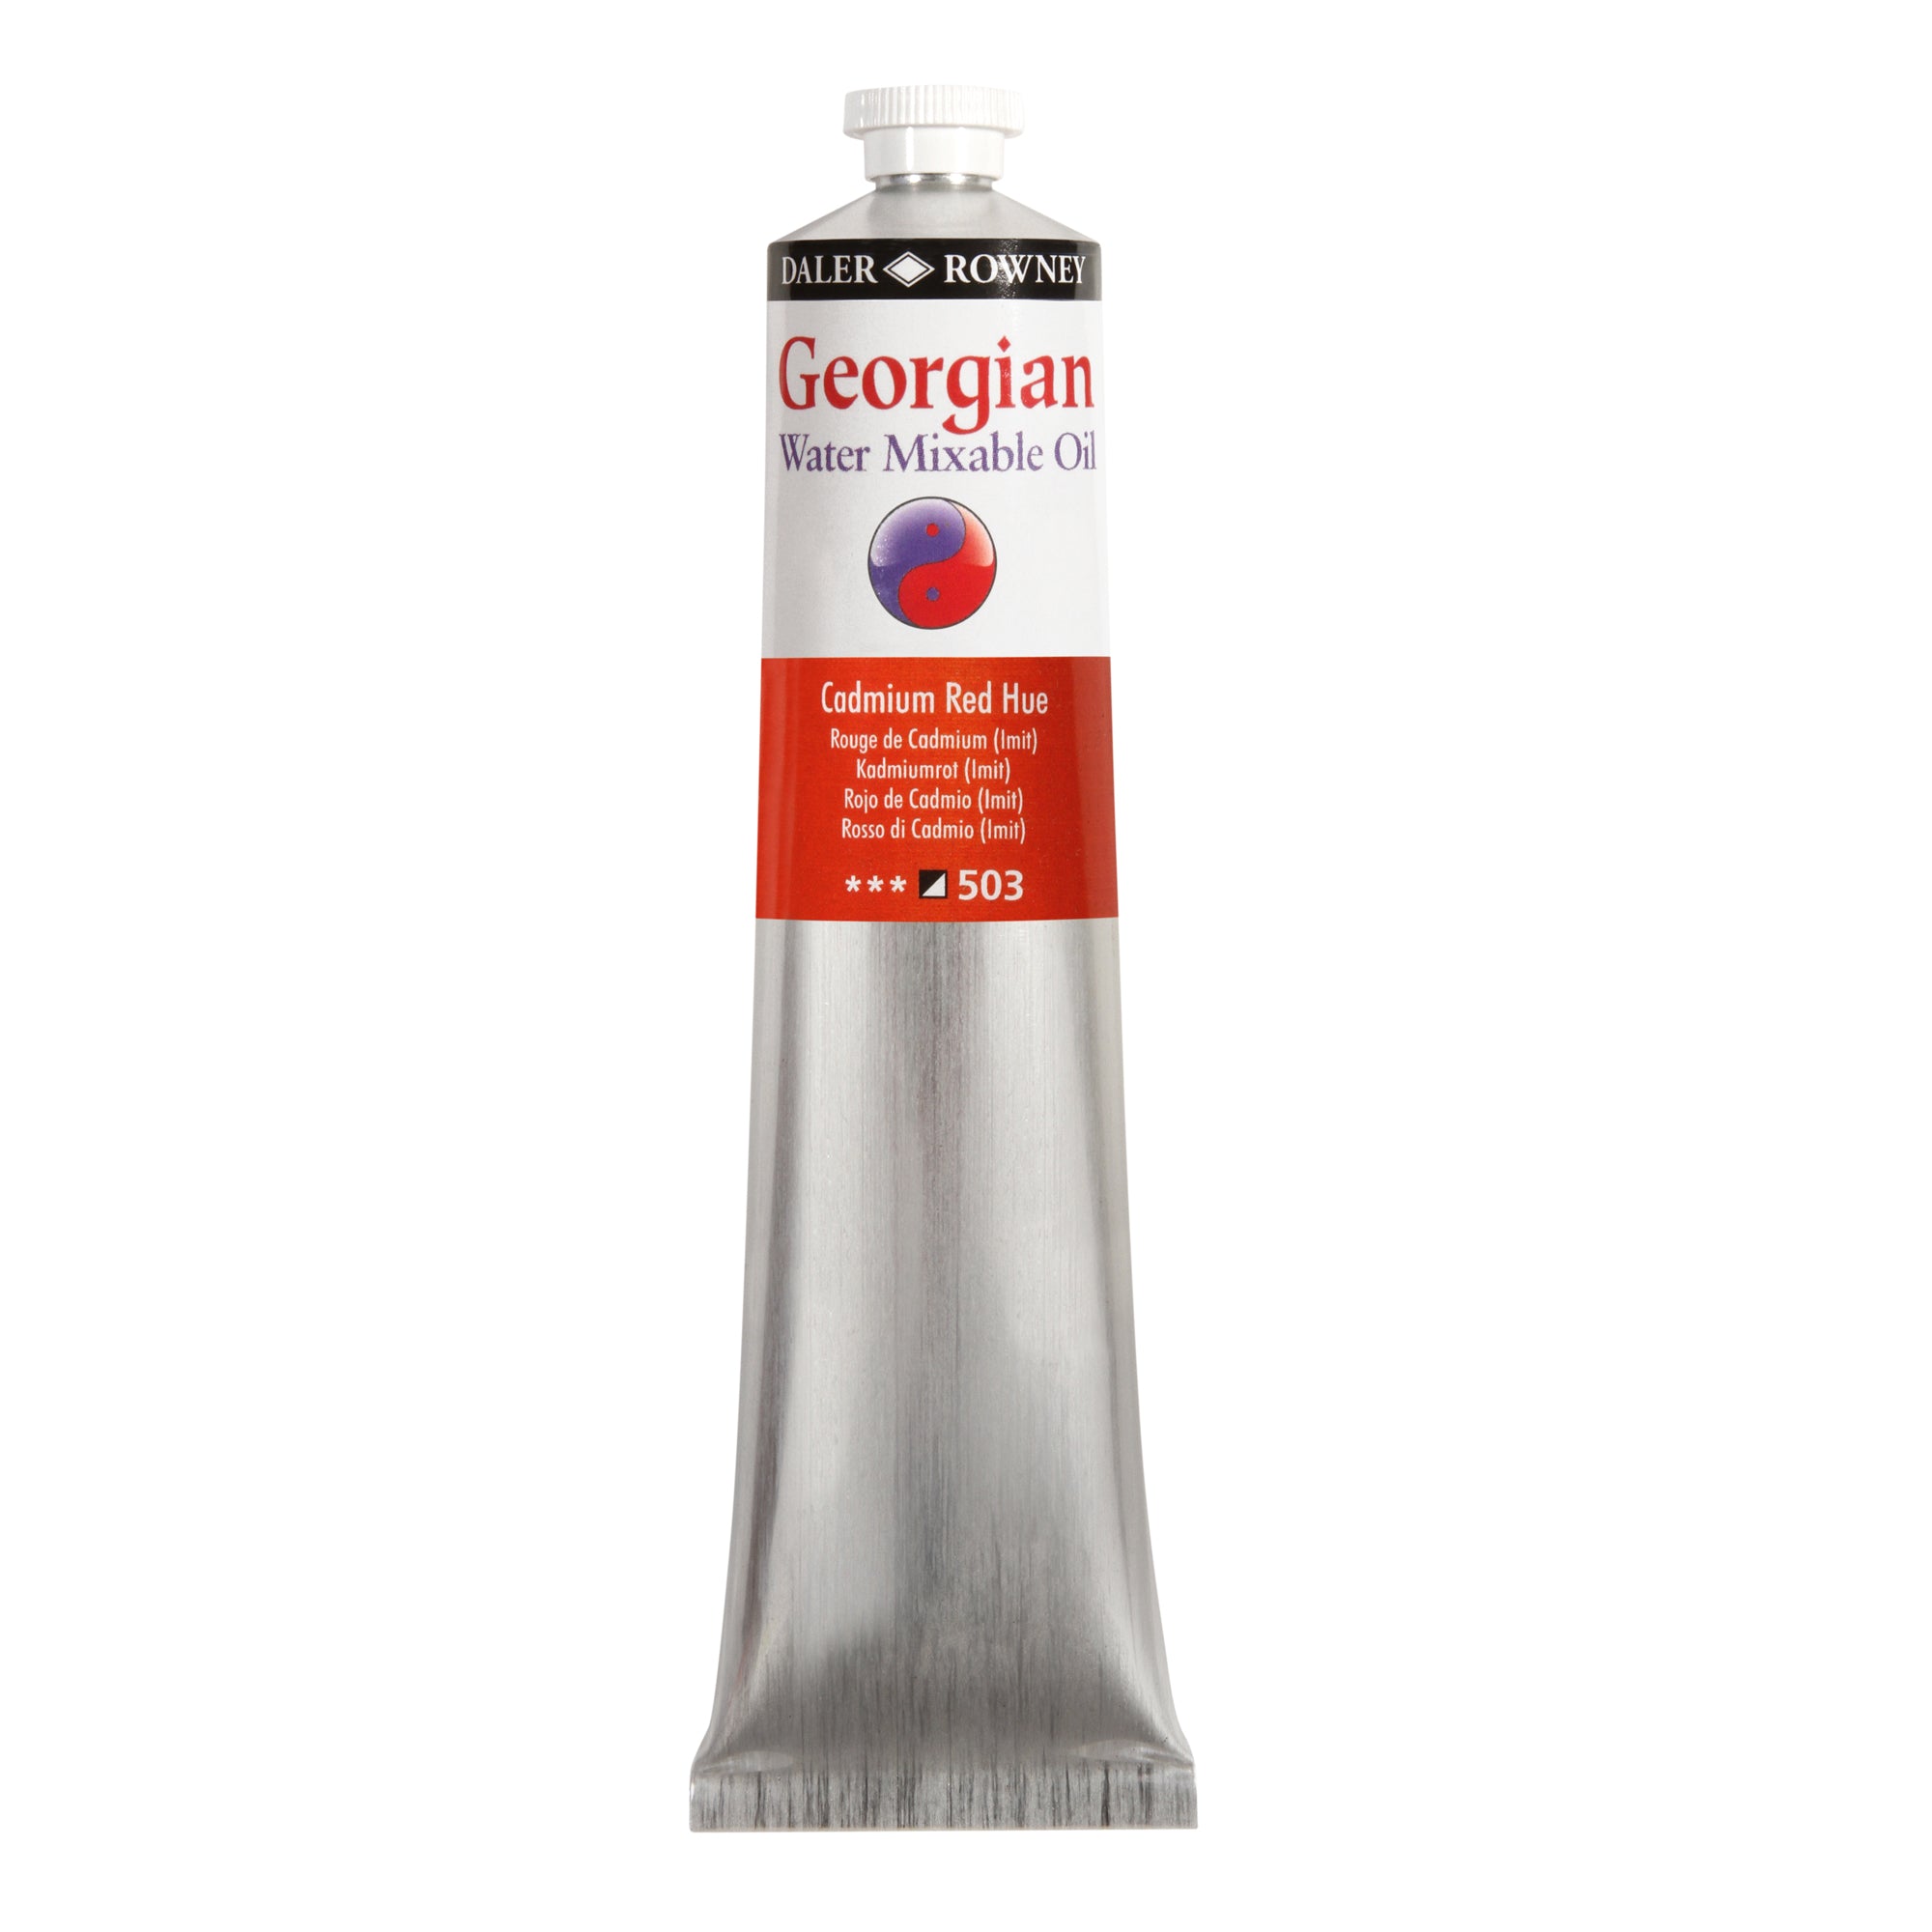 Daler-Rowney Georgian Water Mixable Oil Colours - 200ml - Cad Red Hue